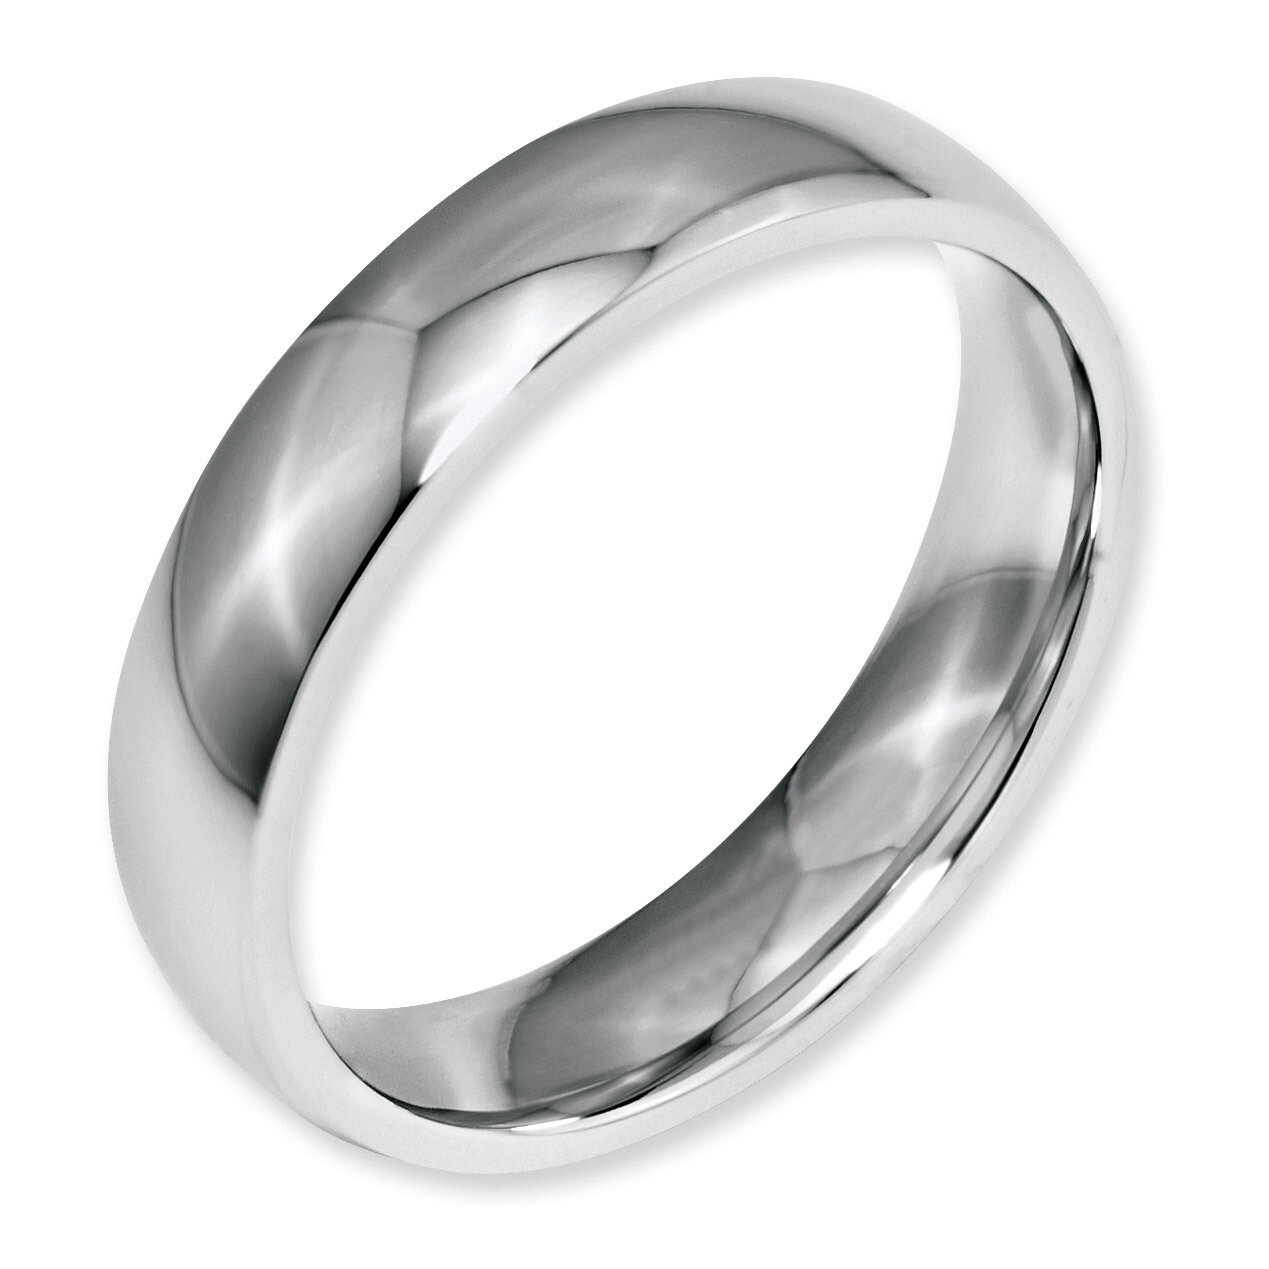 5mm Polished Band - Stainless Steel SR20